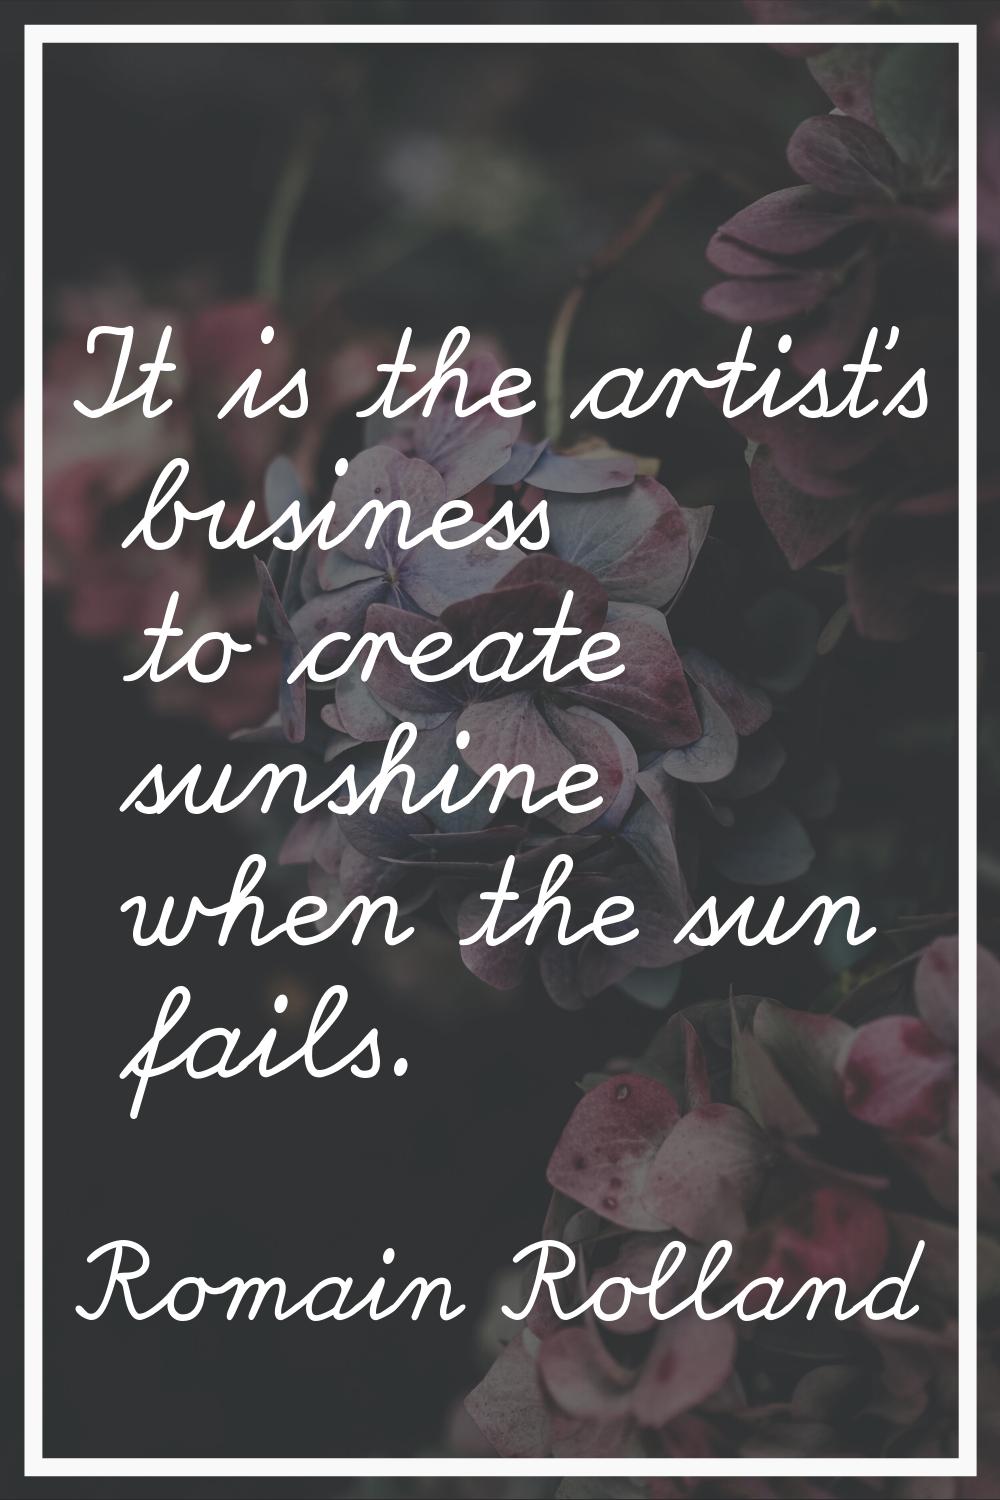 It is the artist's business to create sunshine when the sun fails.